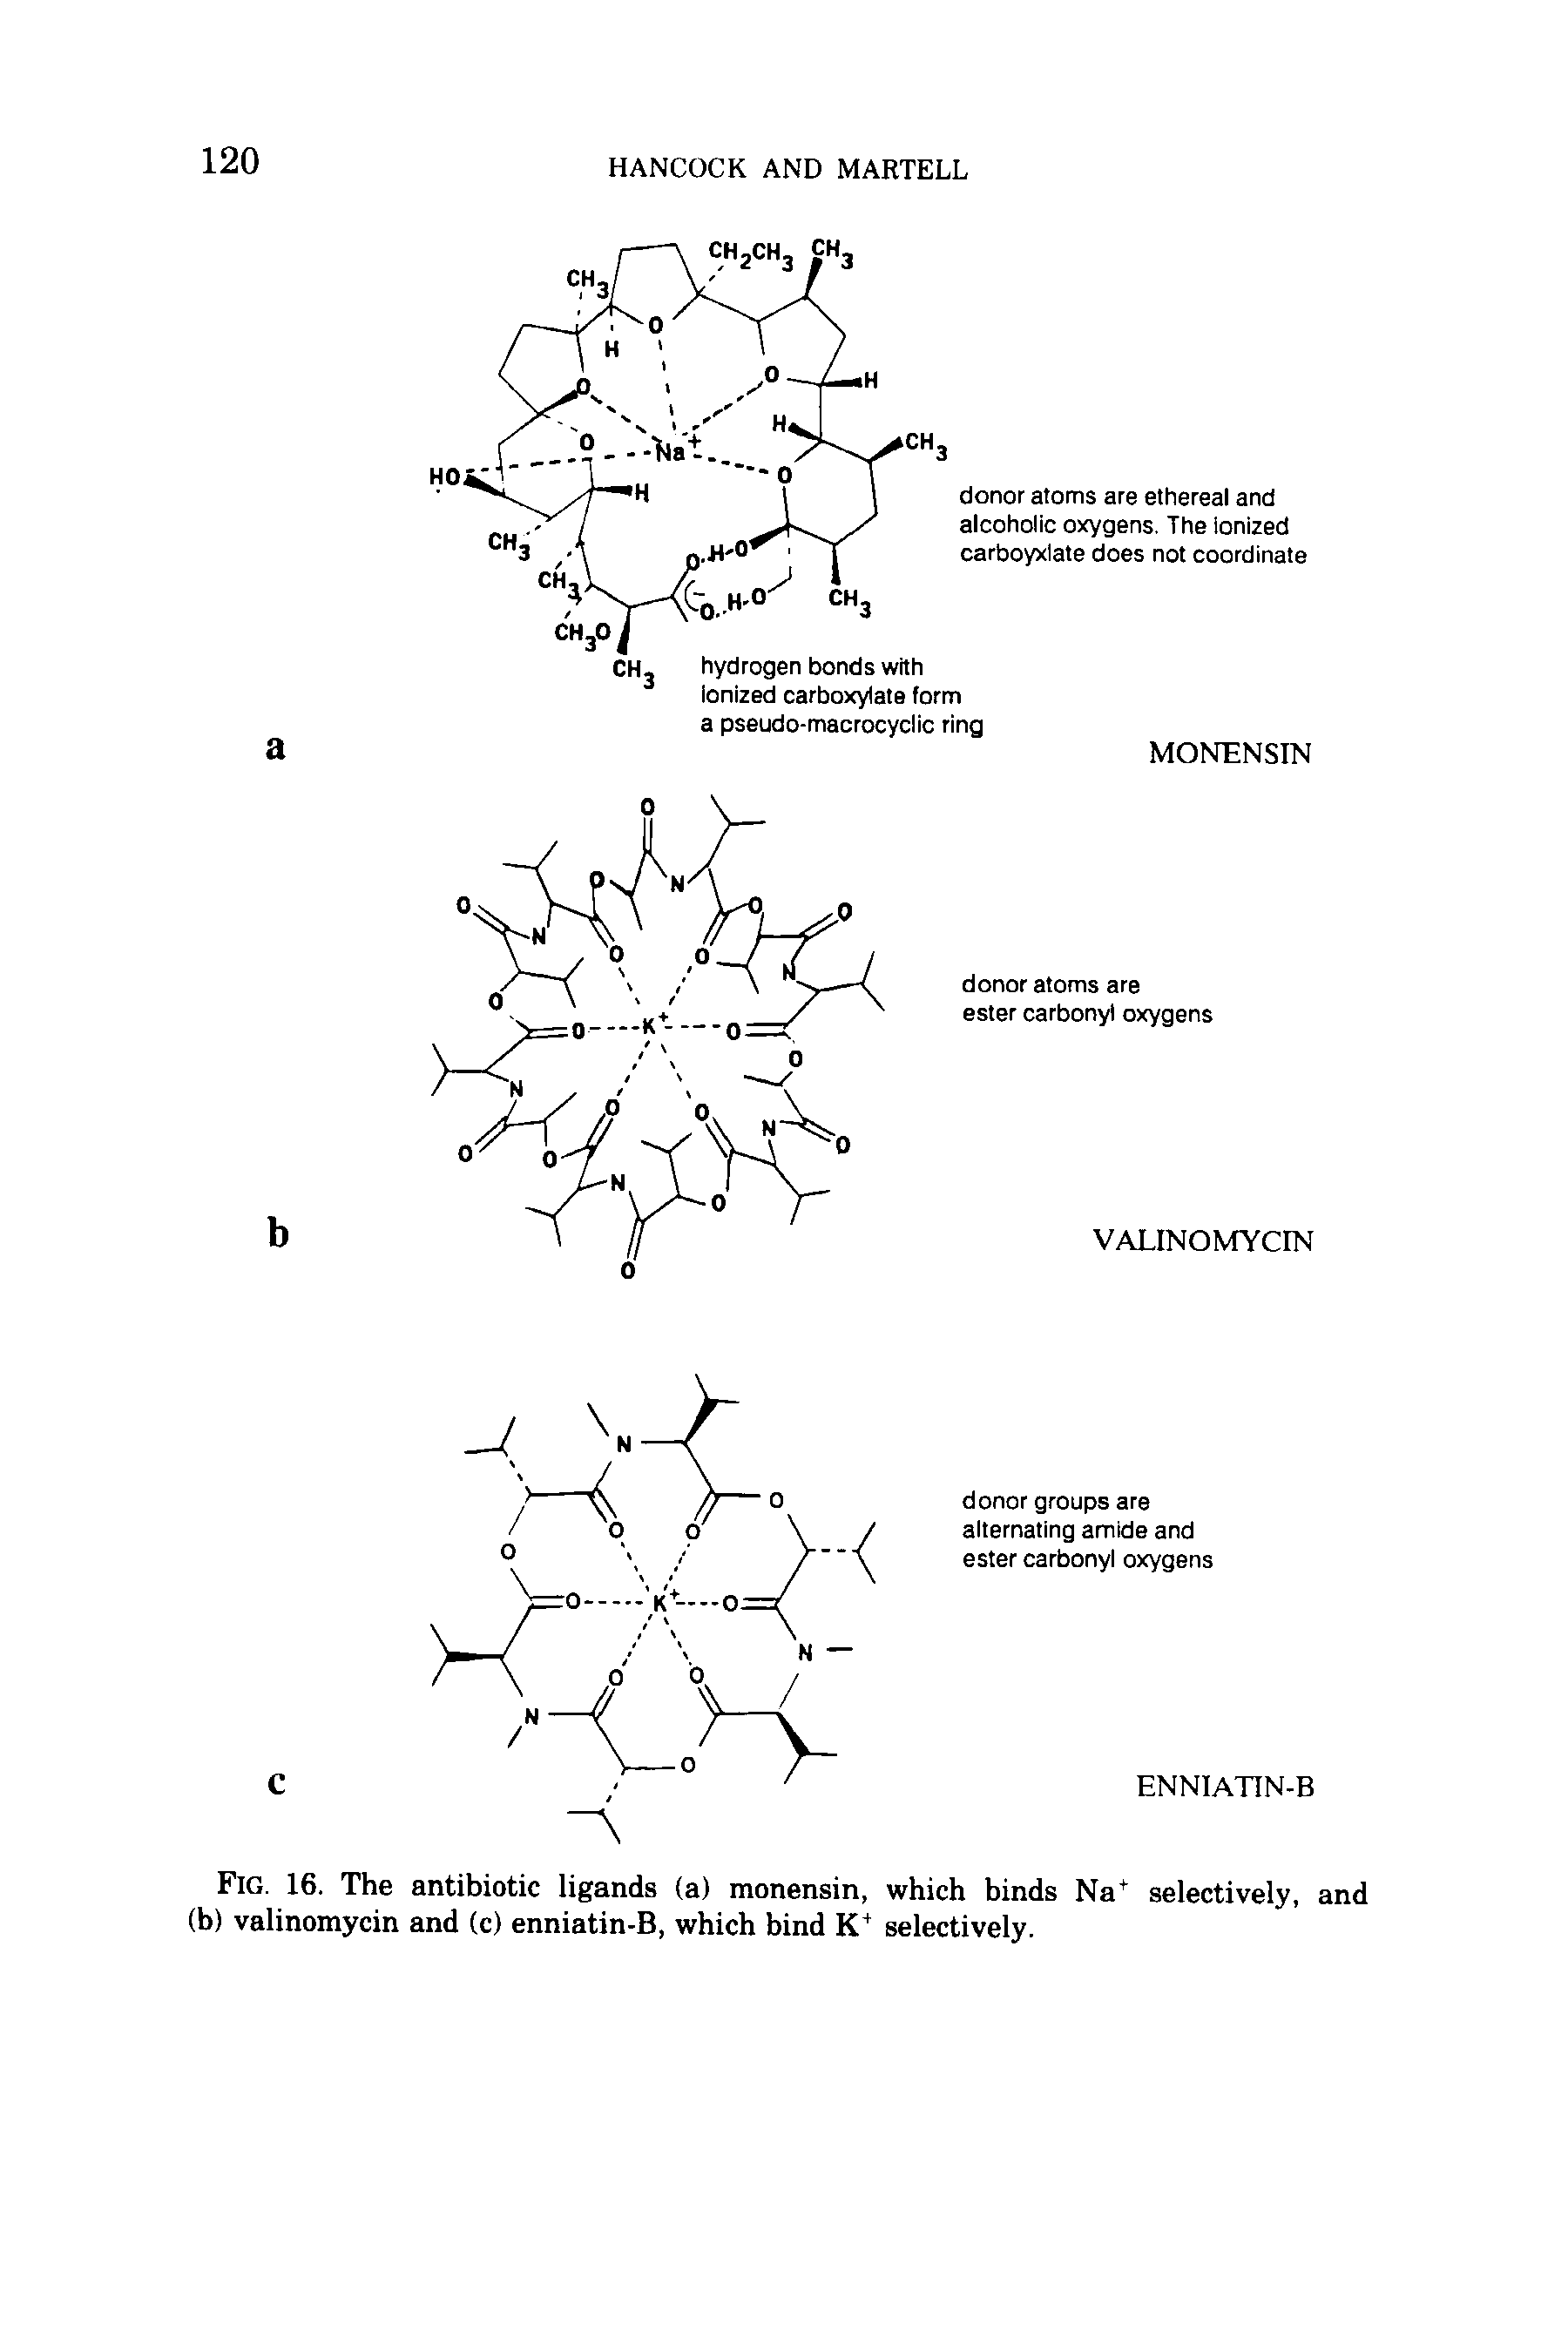 Fig. 16. The antibiotic ligands (a) monensin, which binds Na+ selectively, and (b) valinomycin and (c) enniatin-B, which bind K+ selectively.